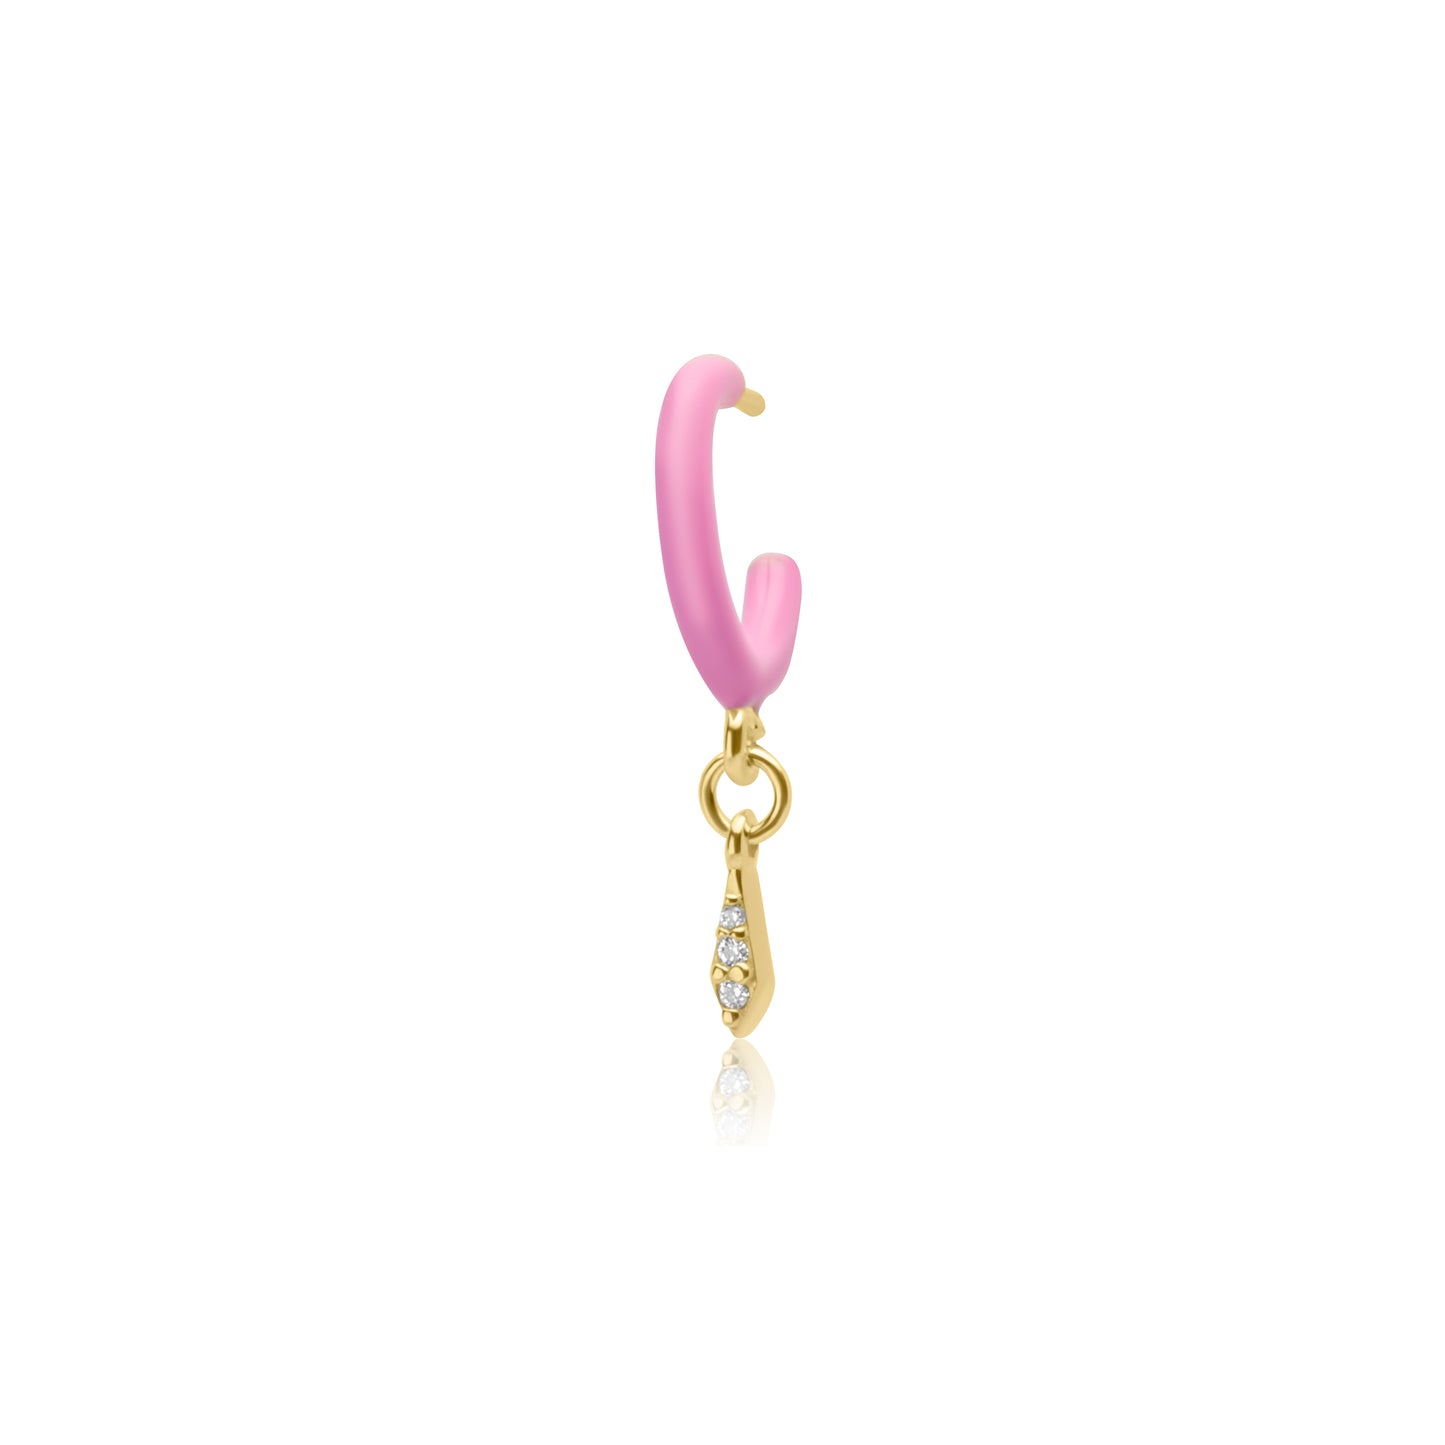 Pink Enamel Hoop with Chocolate Drops Single Earring - Gold Plated